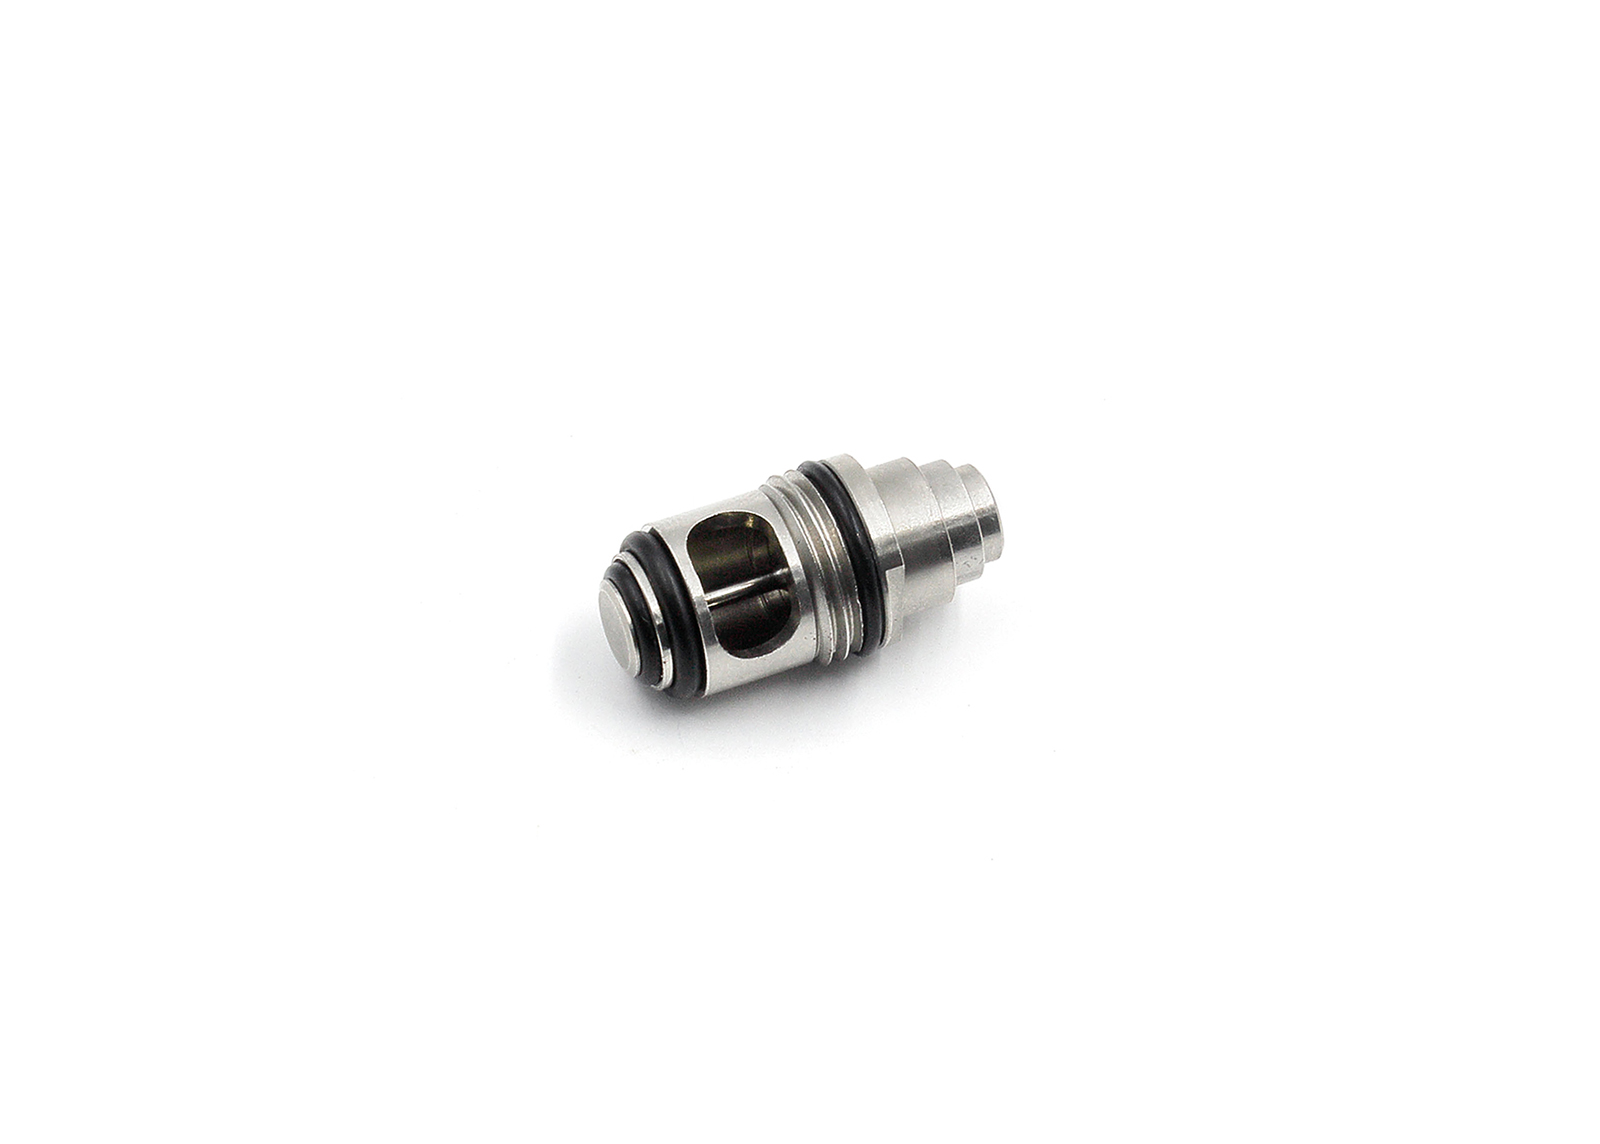 Stainless High Performance Valve for WA .45 Series - Modify Airsoft